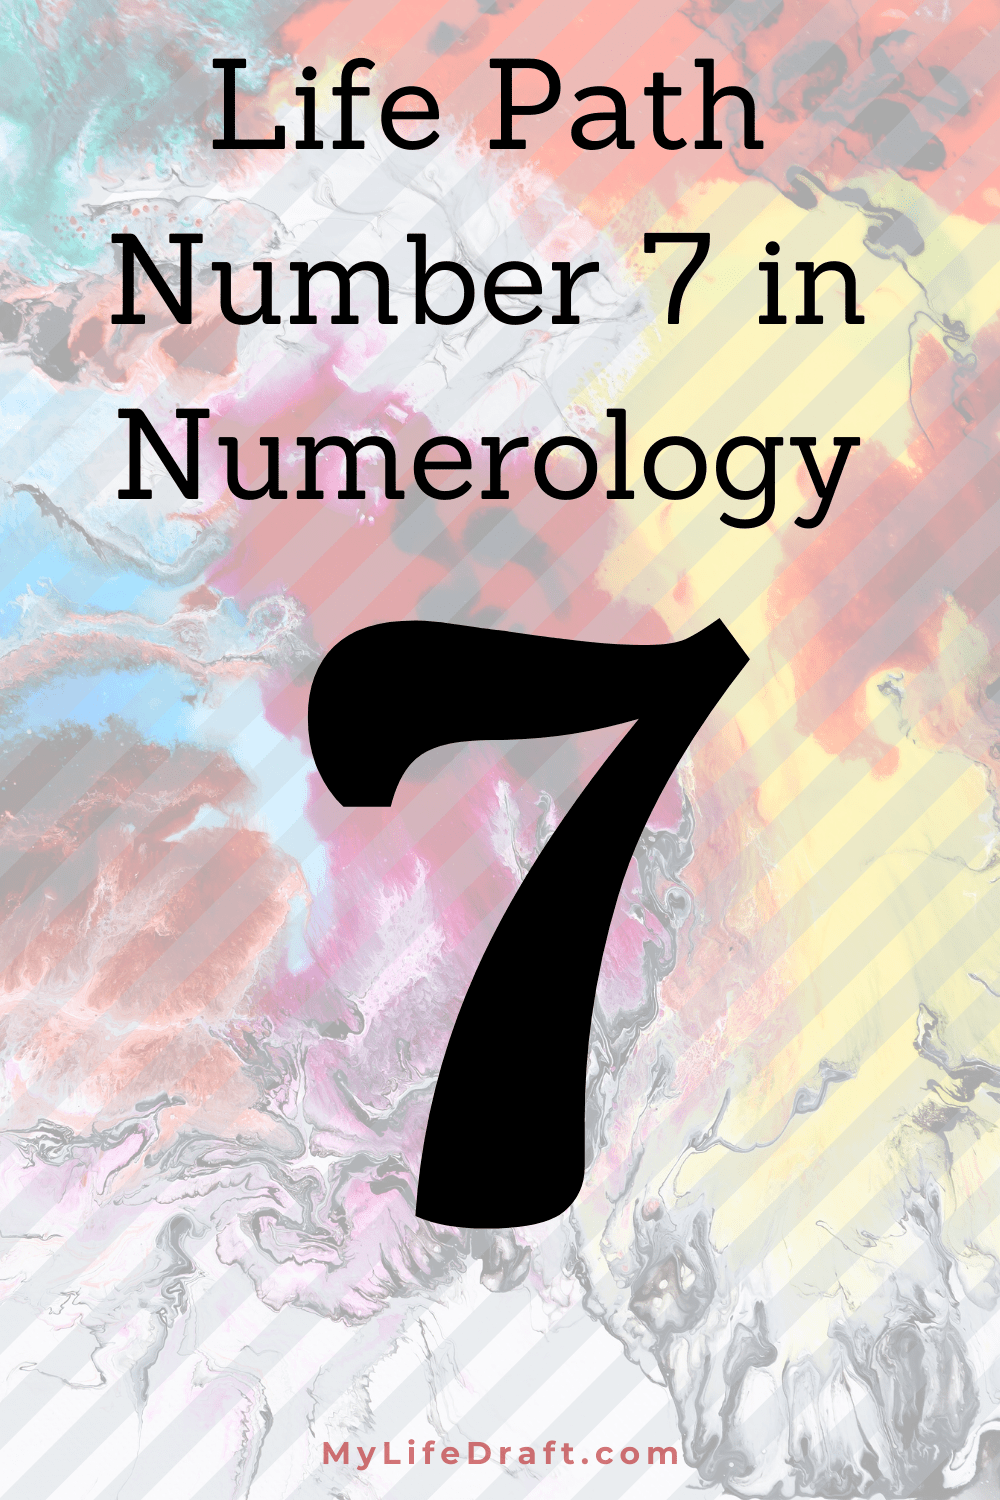 7 in numerology